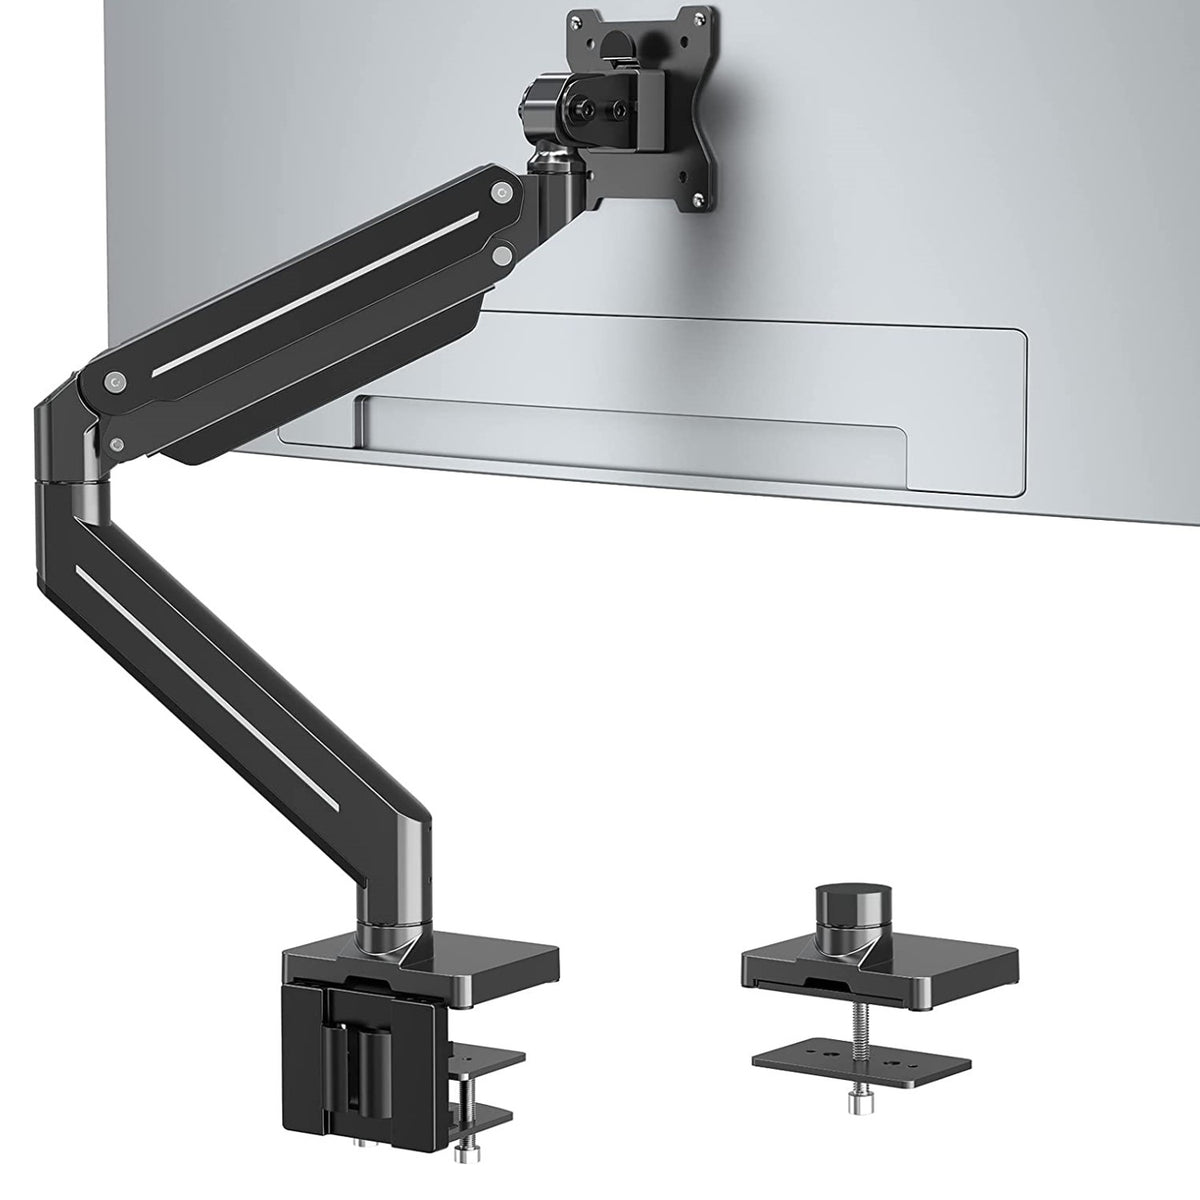 single monitor mount for ultra wide monitor